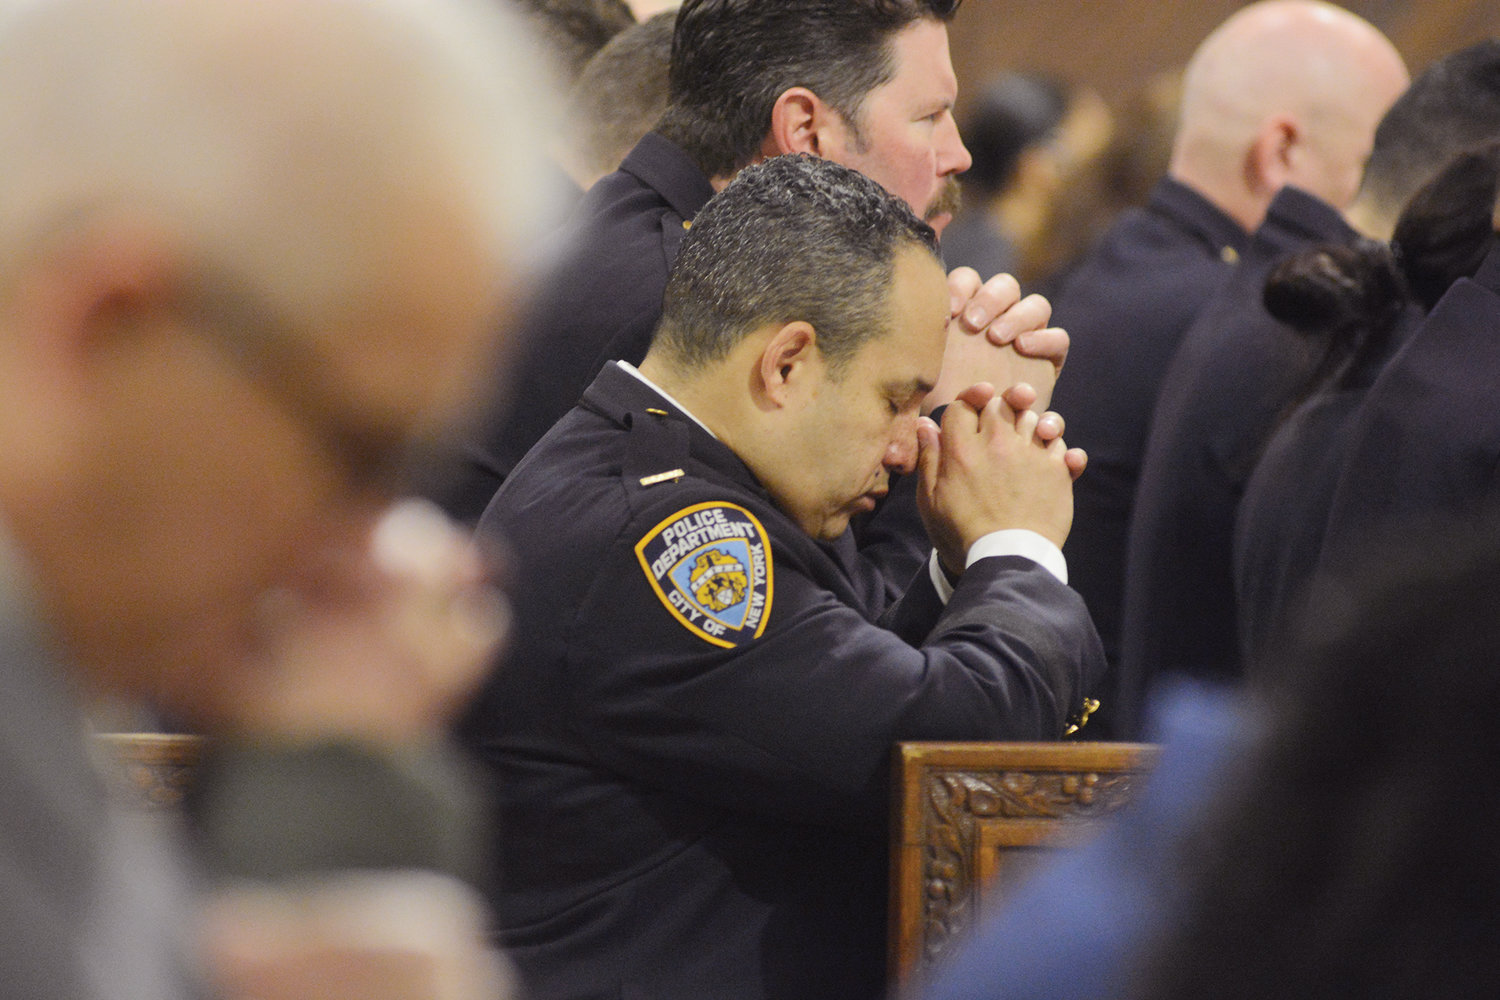 Officers pray in the pews.